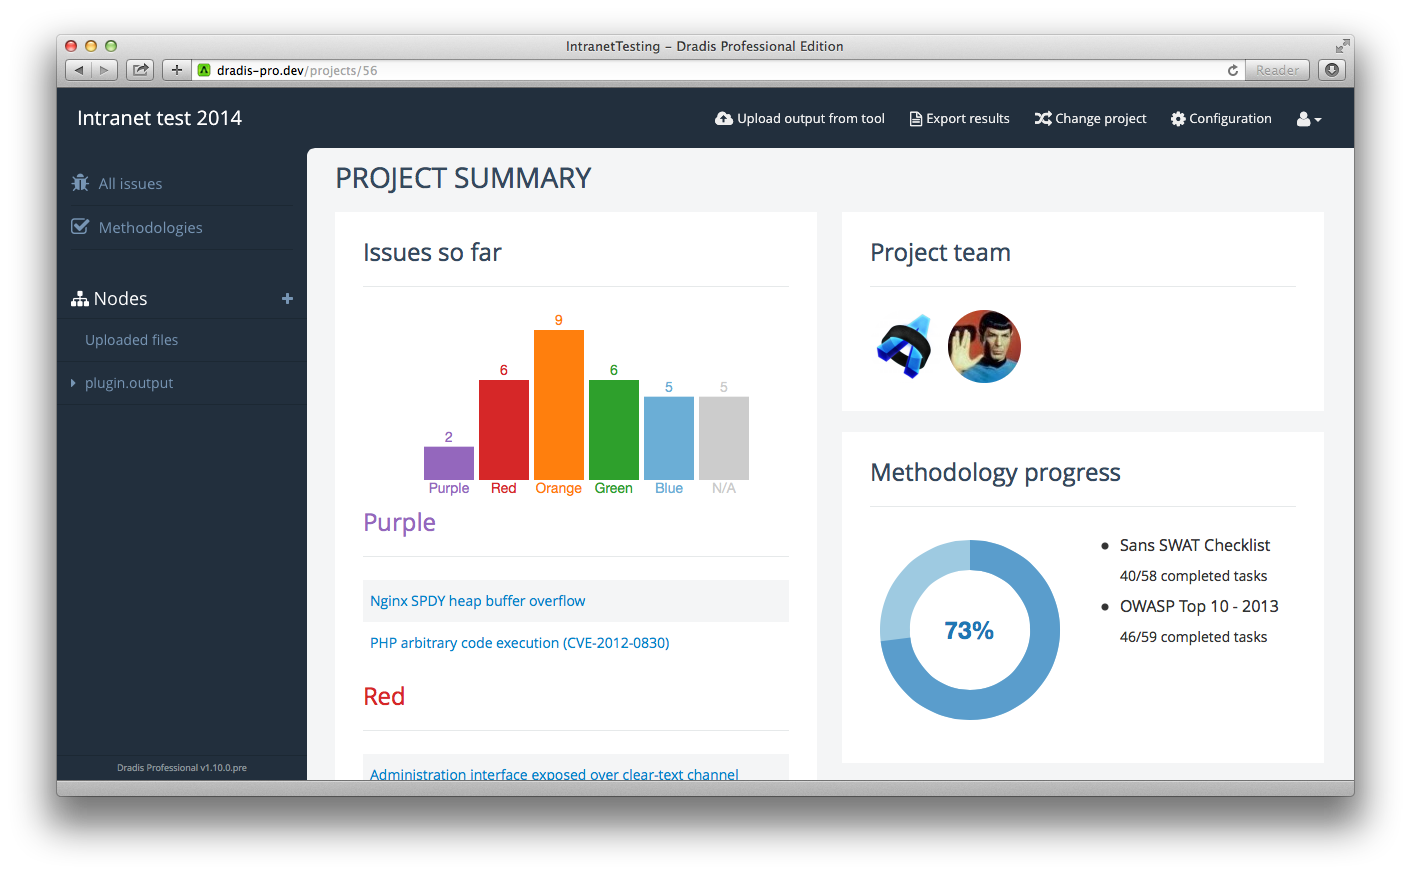 A screenshot showing the new Project Summary view. Includes an issue chart and a methodology progress meter